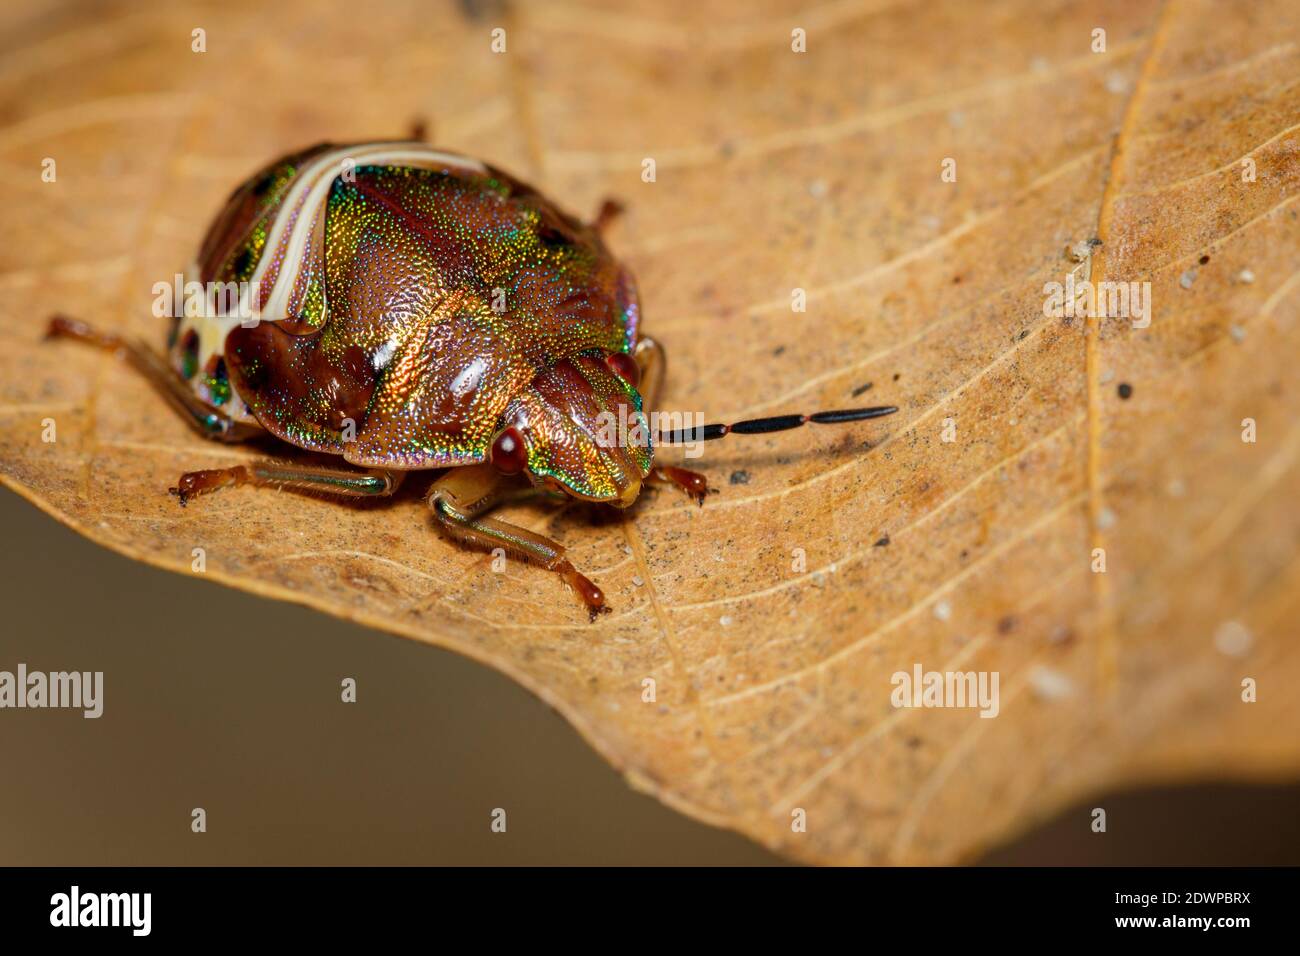 Image of beetle ladybird (Hippodamia variegata) on a brown leaf. Insect.  Animal. Stock Photo